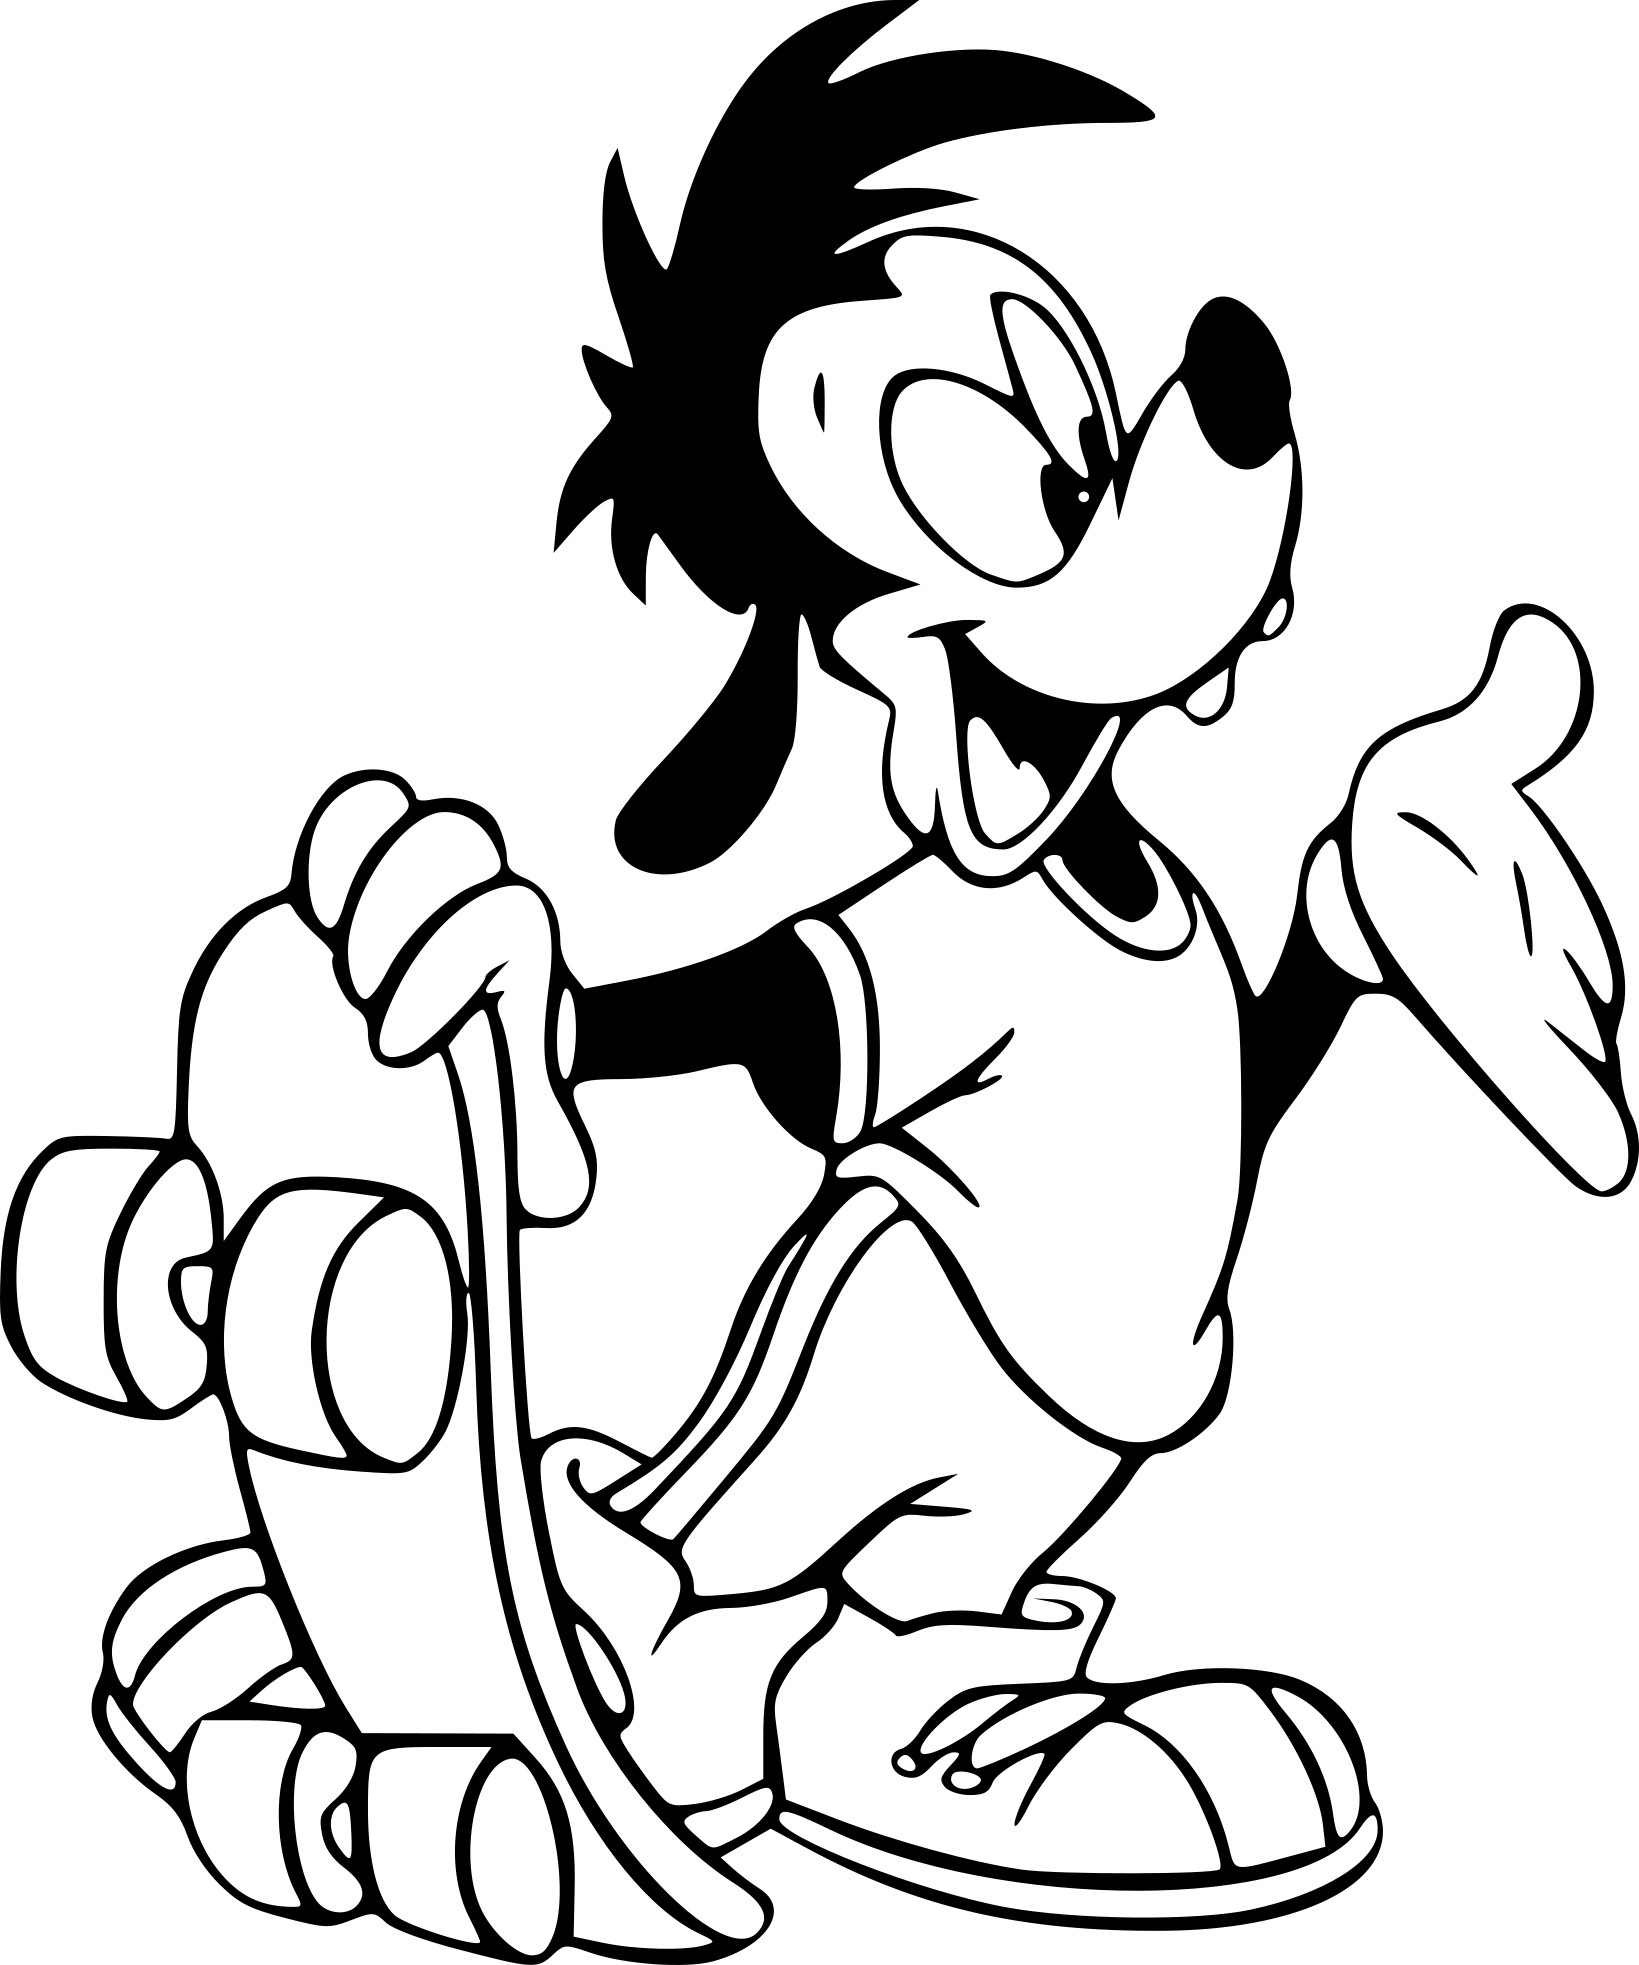 Goofy Coloring Pages For Kids - Max Goofy Coloring Pages